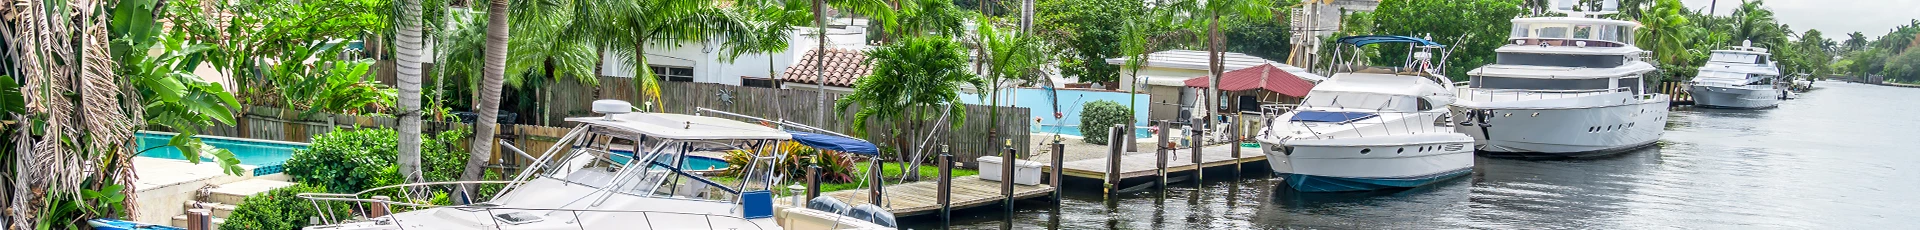 Boat Removal, Dismantle and Disposal in West Melbourne Florida